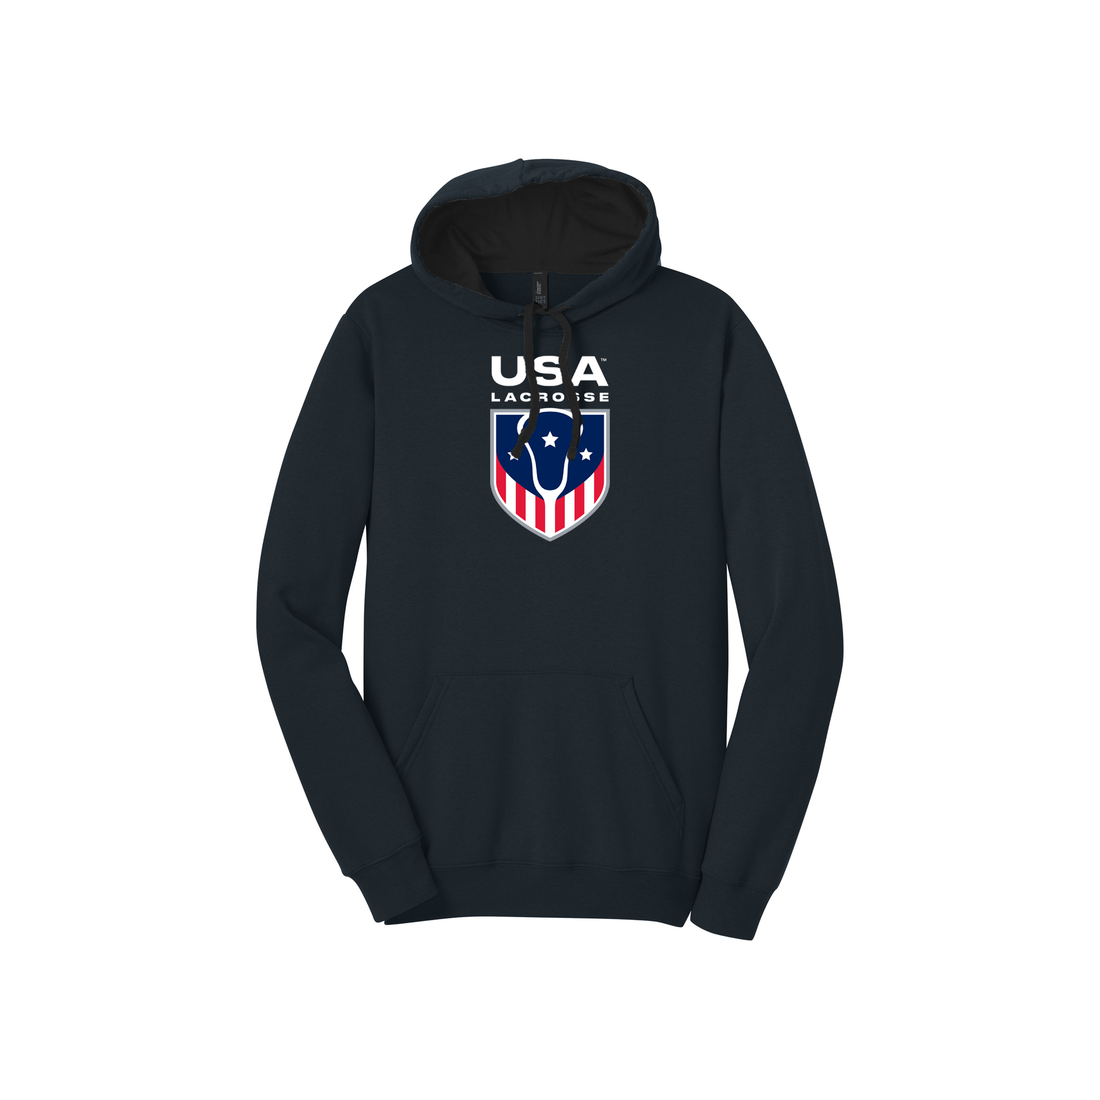 Adult's USA Lacrosse Pullover Hoodie